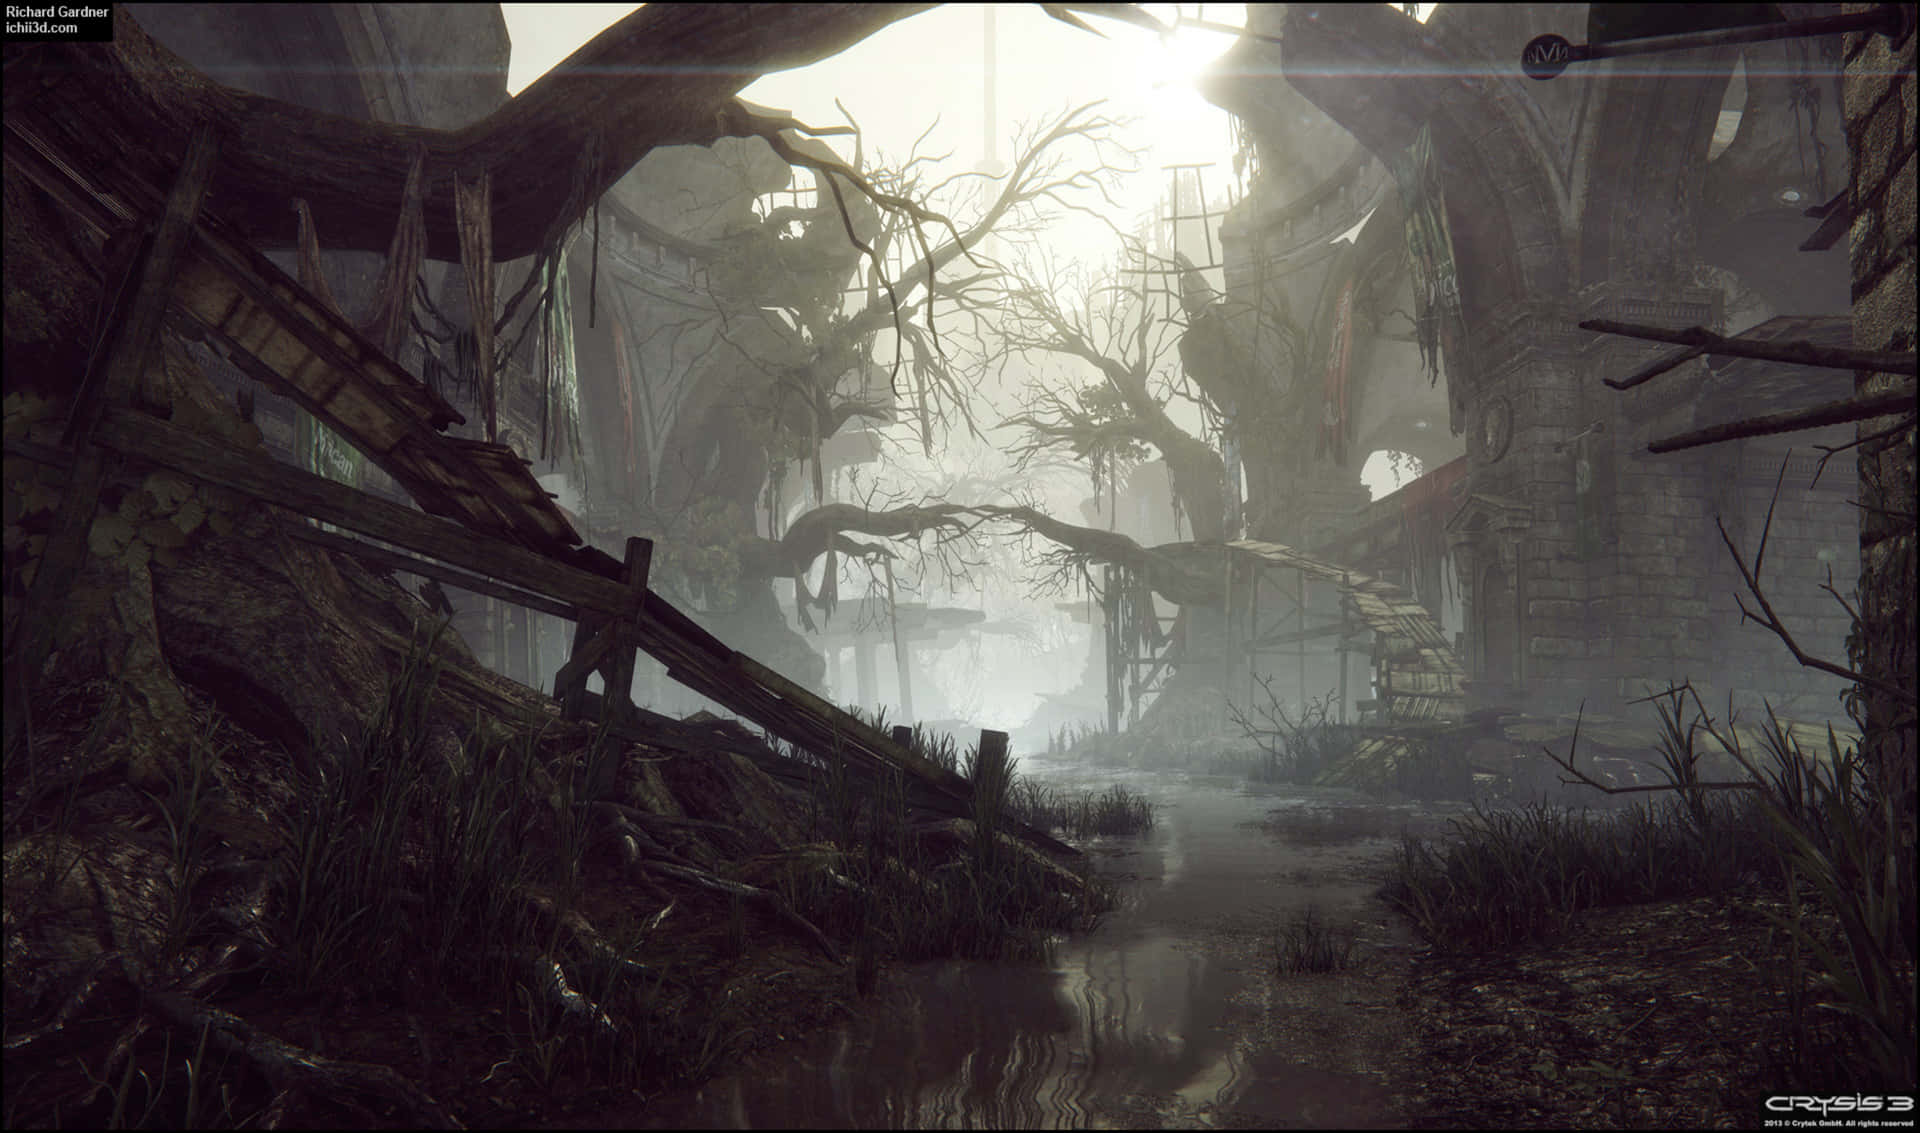 'The explosive beauty of Crysis 3 rendered at 2440x1440.'